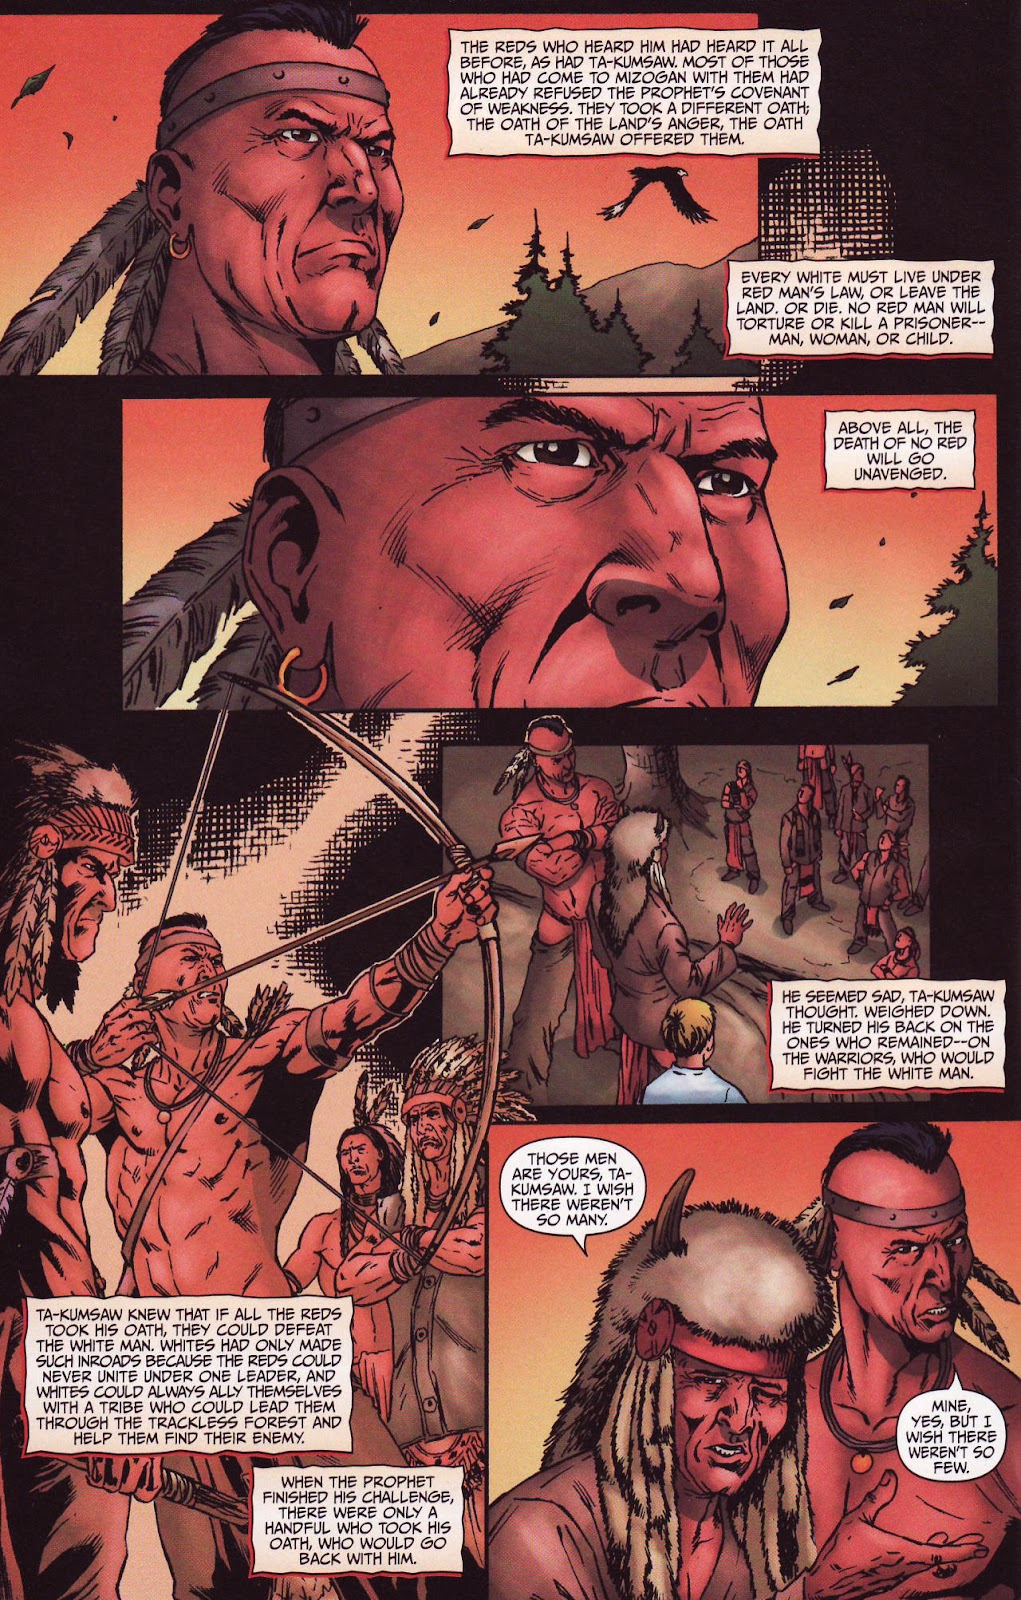 Red Prophet: The Tales of Alvin Maker issue 8 - Page 4